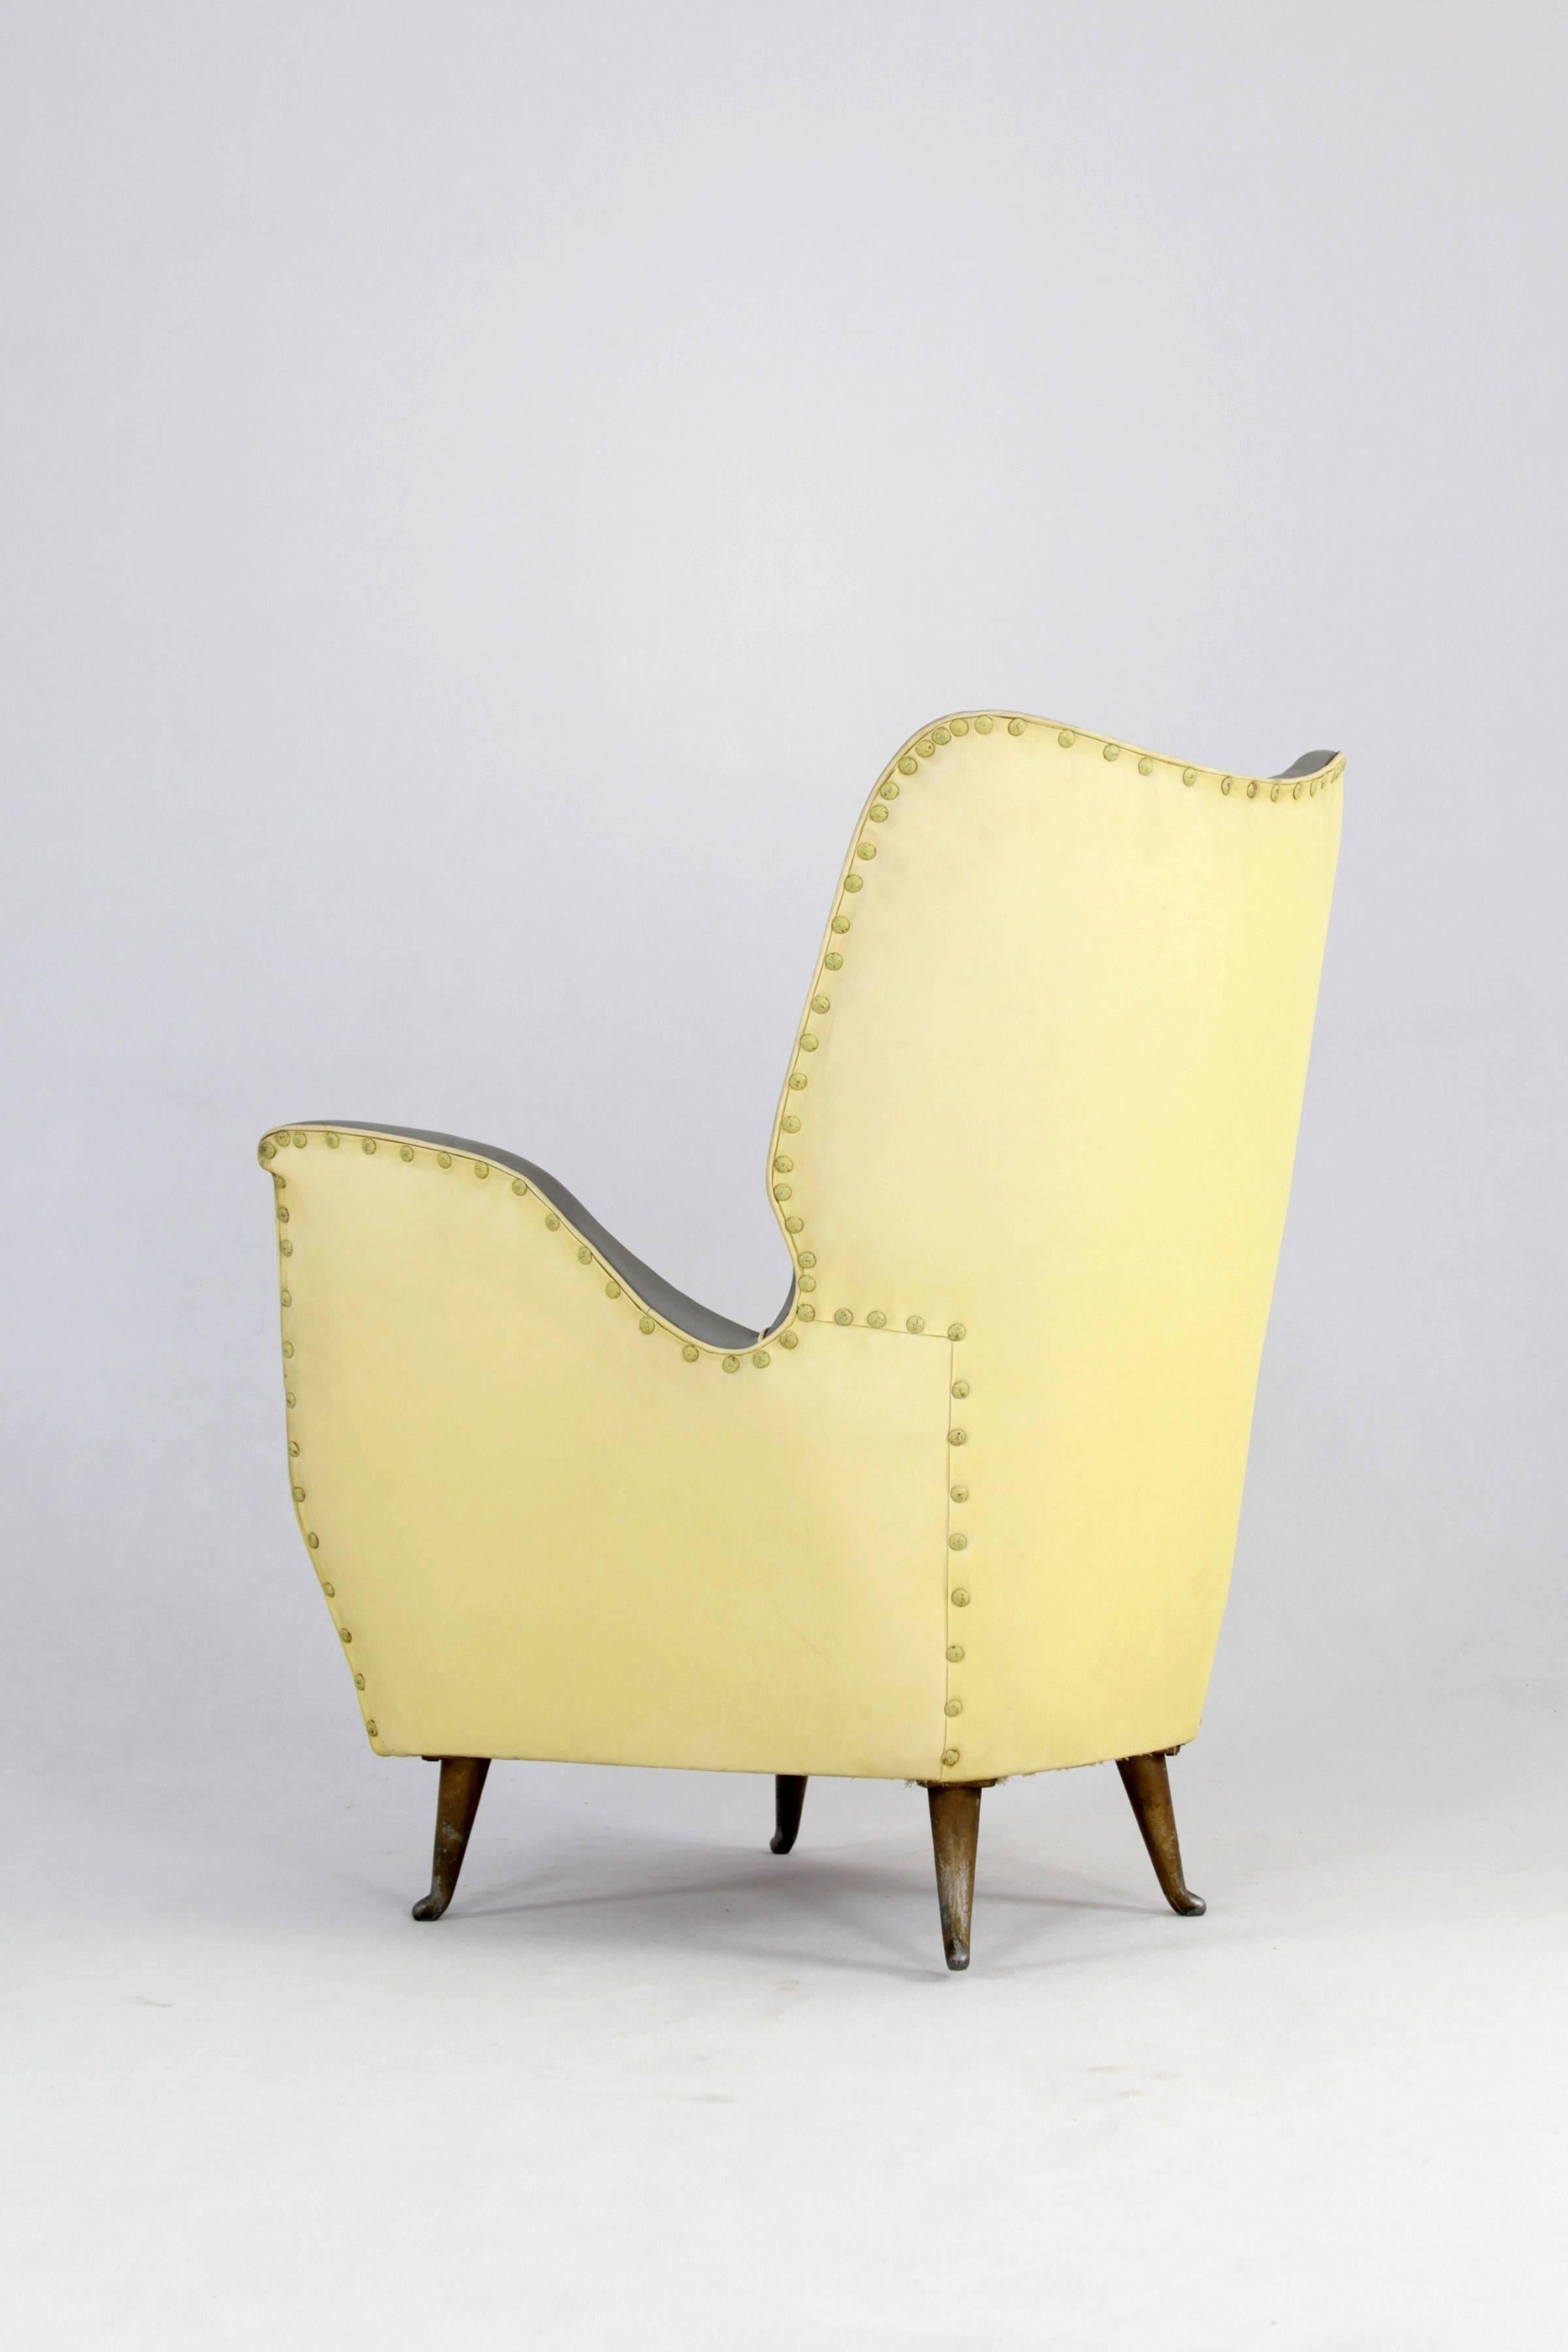 Italian Chairs with Two-Tone Cover, Manufactured by I.S.A. Bergamo, 1950s For Sale